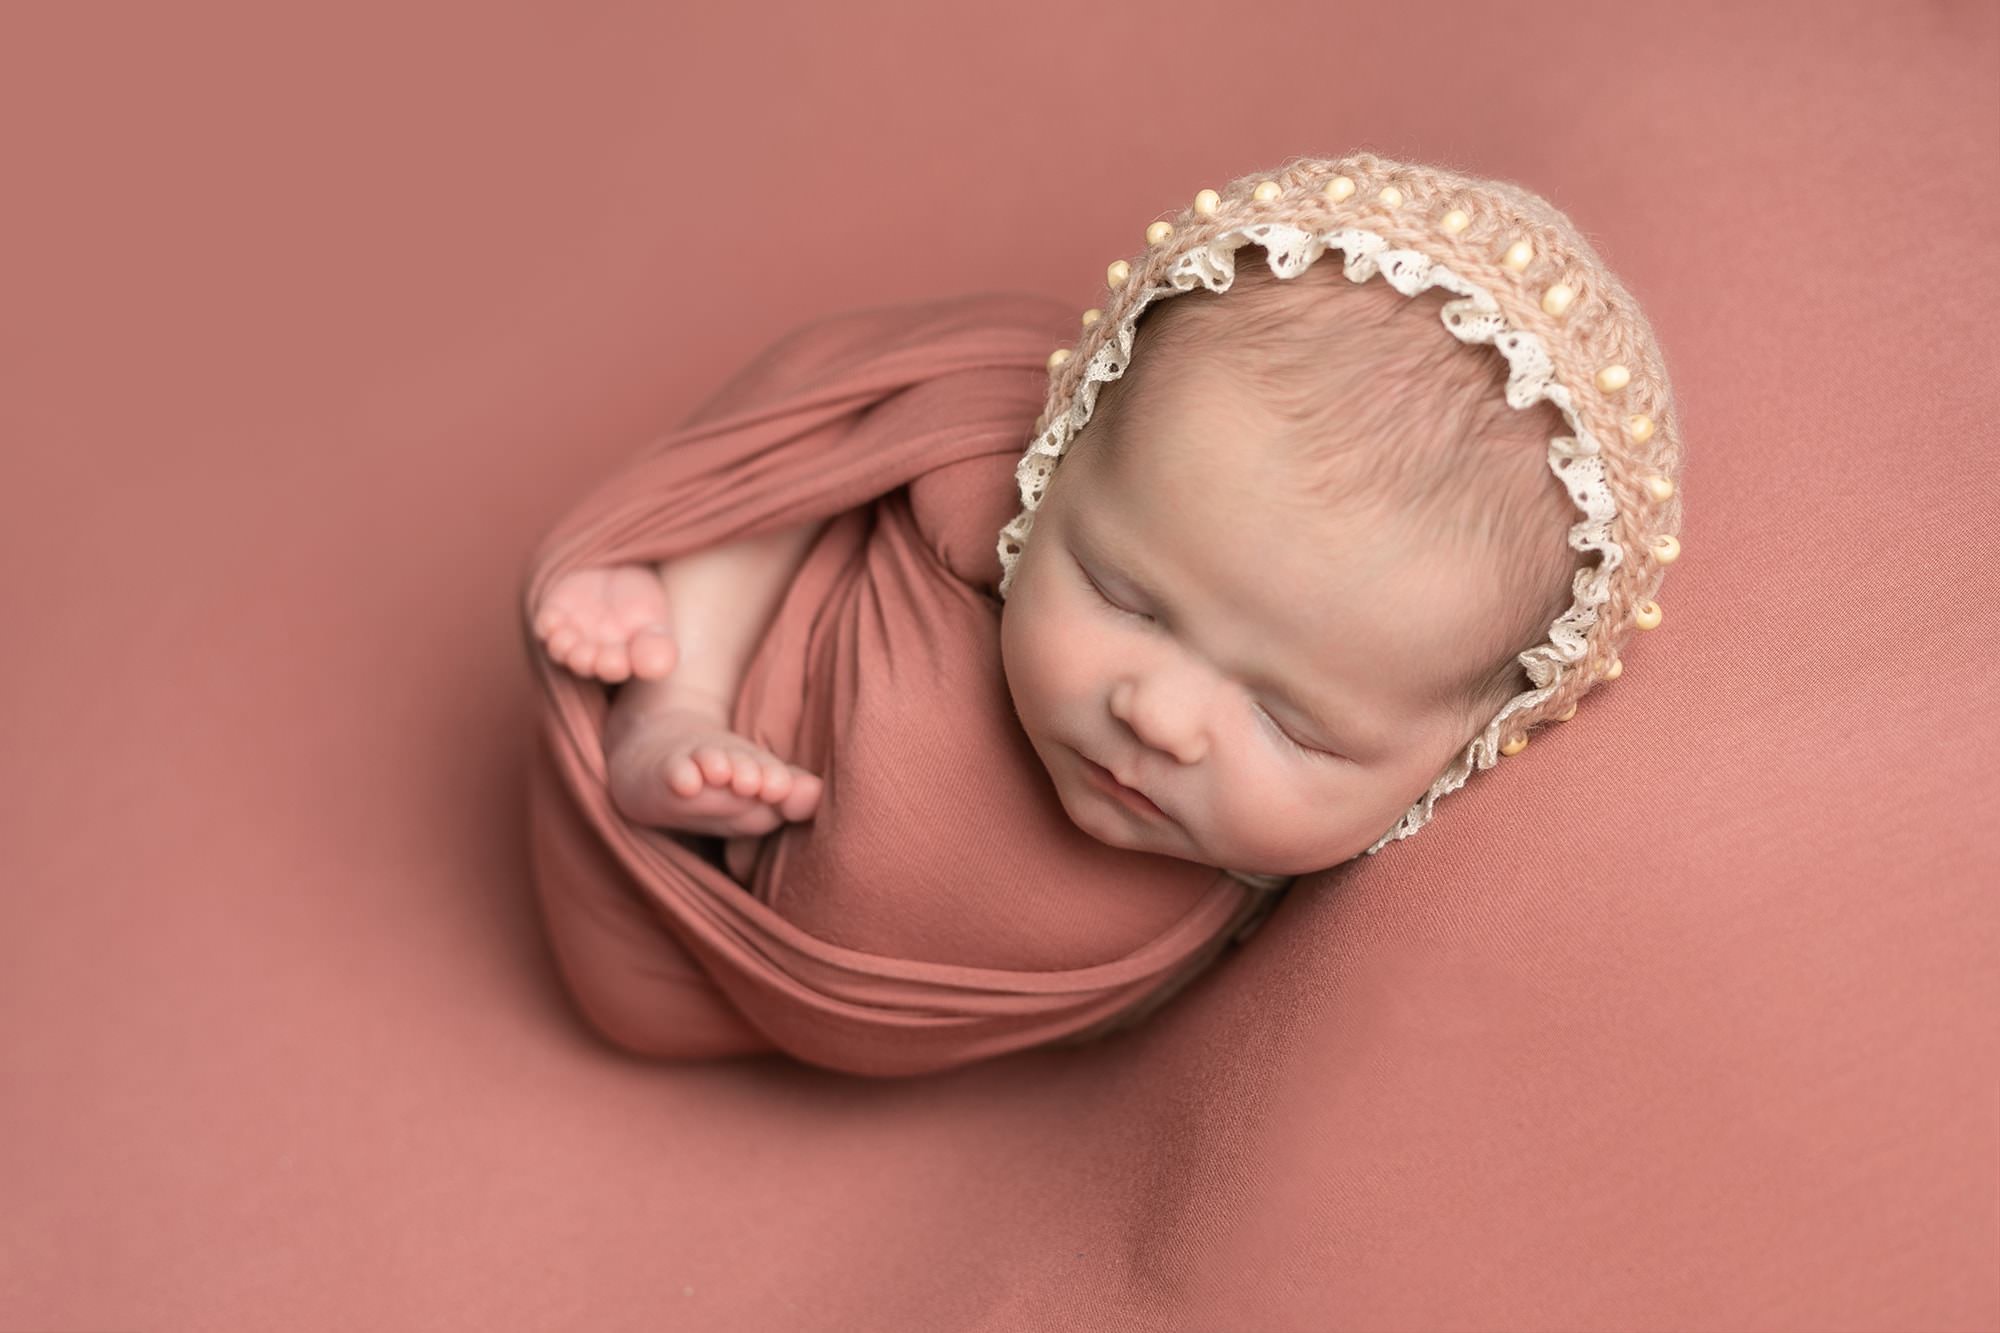 Baby girl on dusky pink backdrop swaddled in wrap of same collier with feet showing. Baby wears a pink bonnet.Image captured during newborn photography session in Glasgow